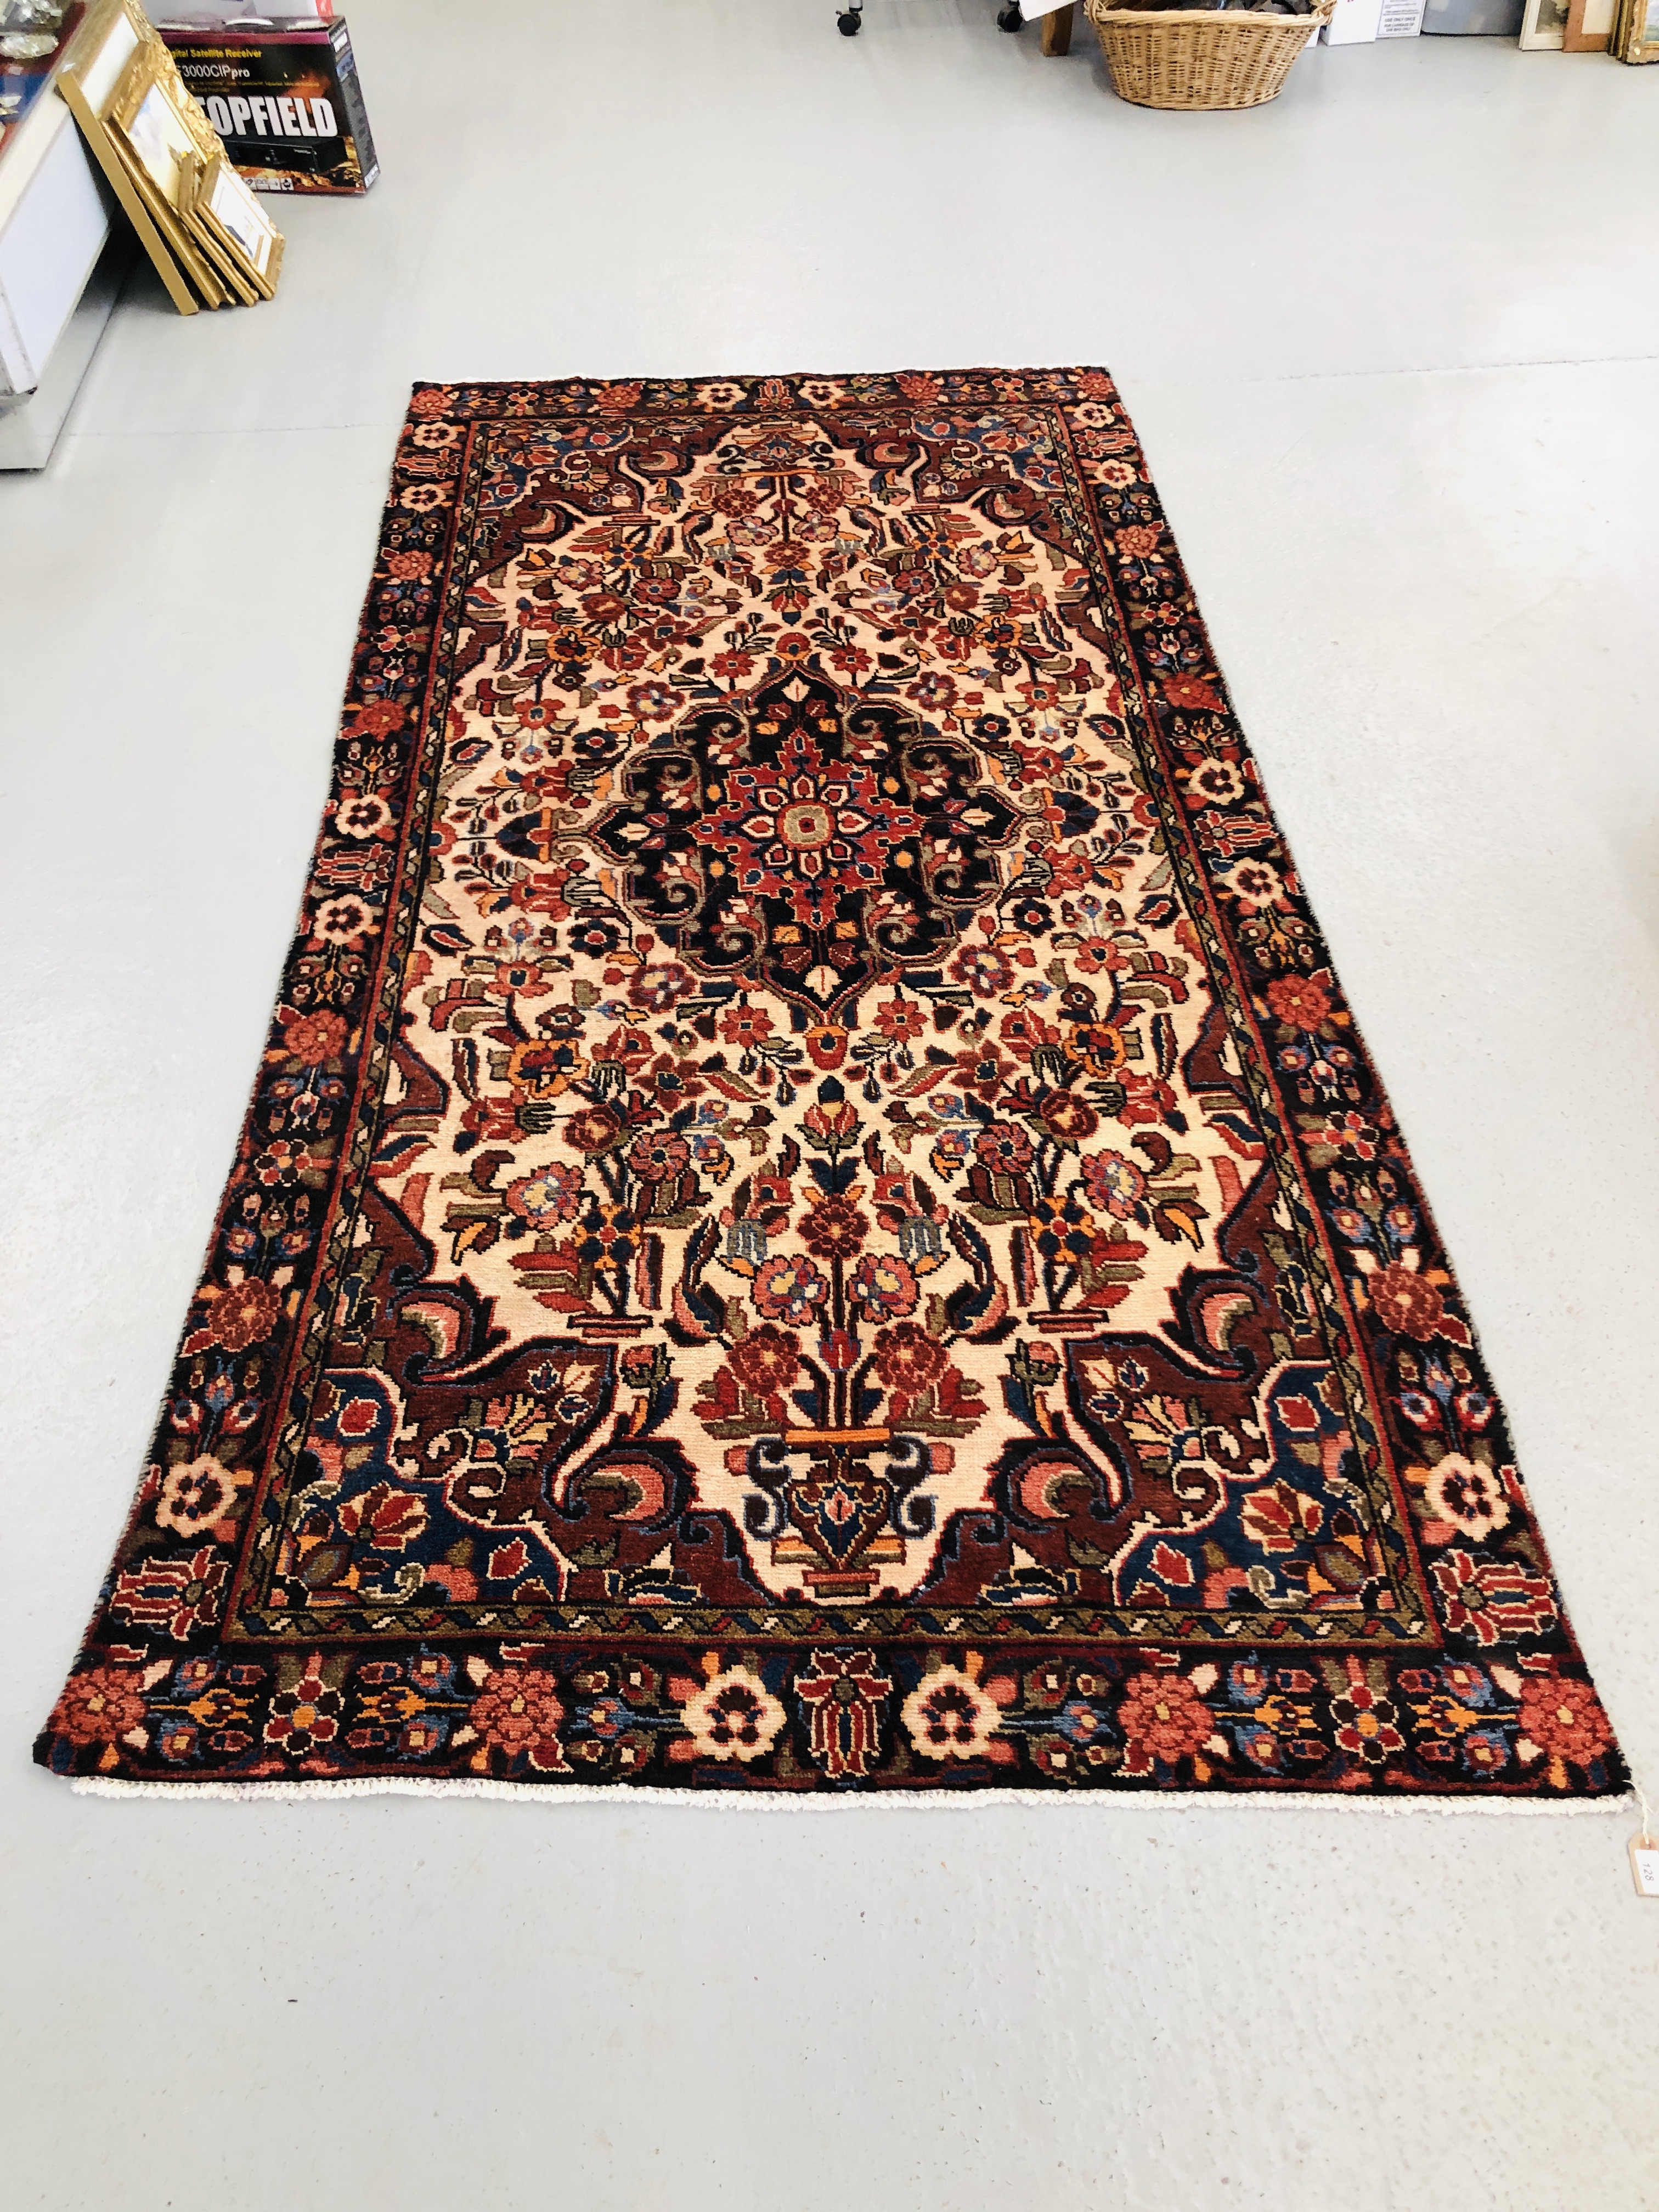 A LILIHAN TRADITIONAL TRADITIONAL BLUE / ORANGE / FAWN PATTERNED RUG 2.90 X 1. - Image 2 of 3